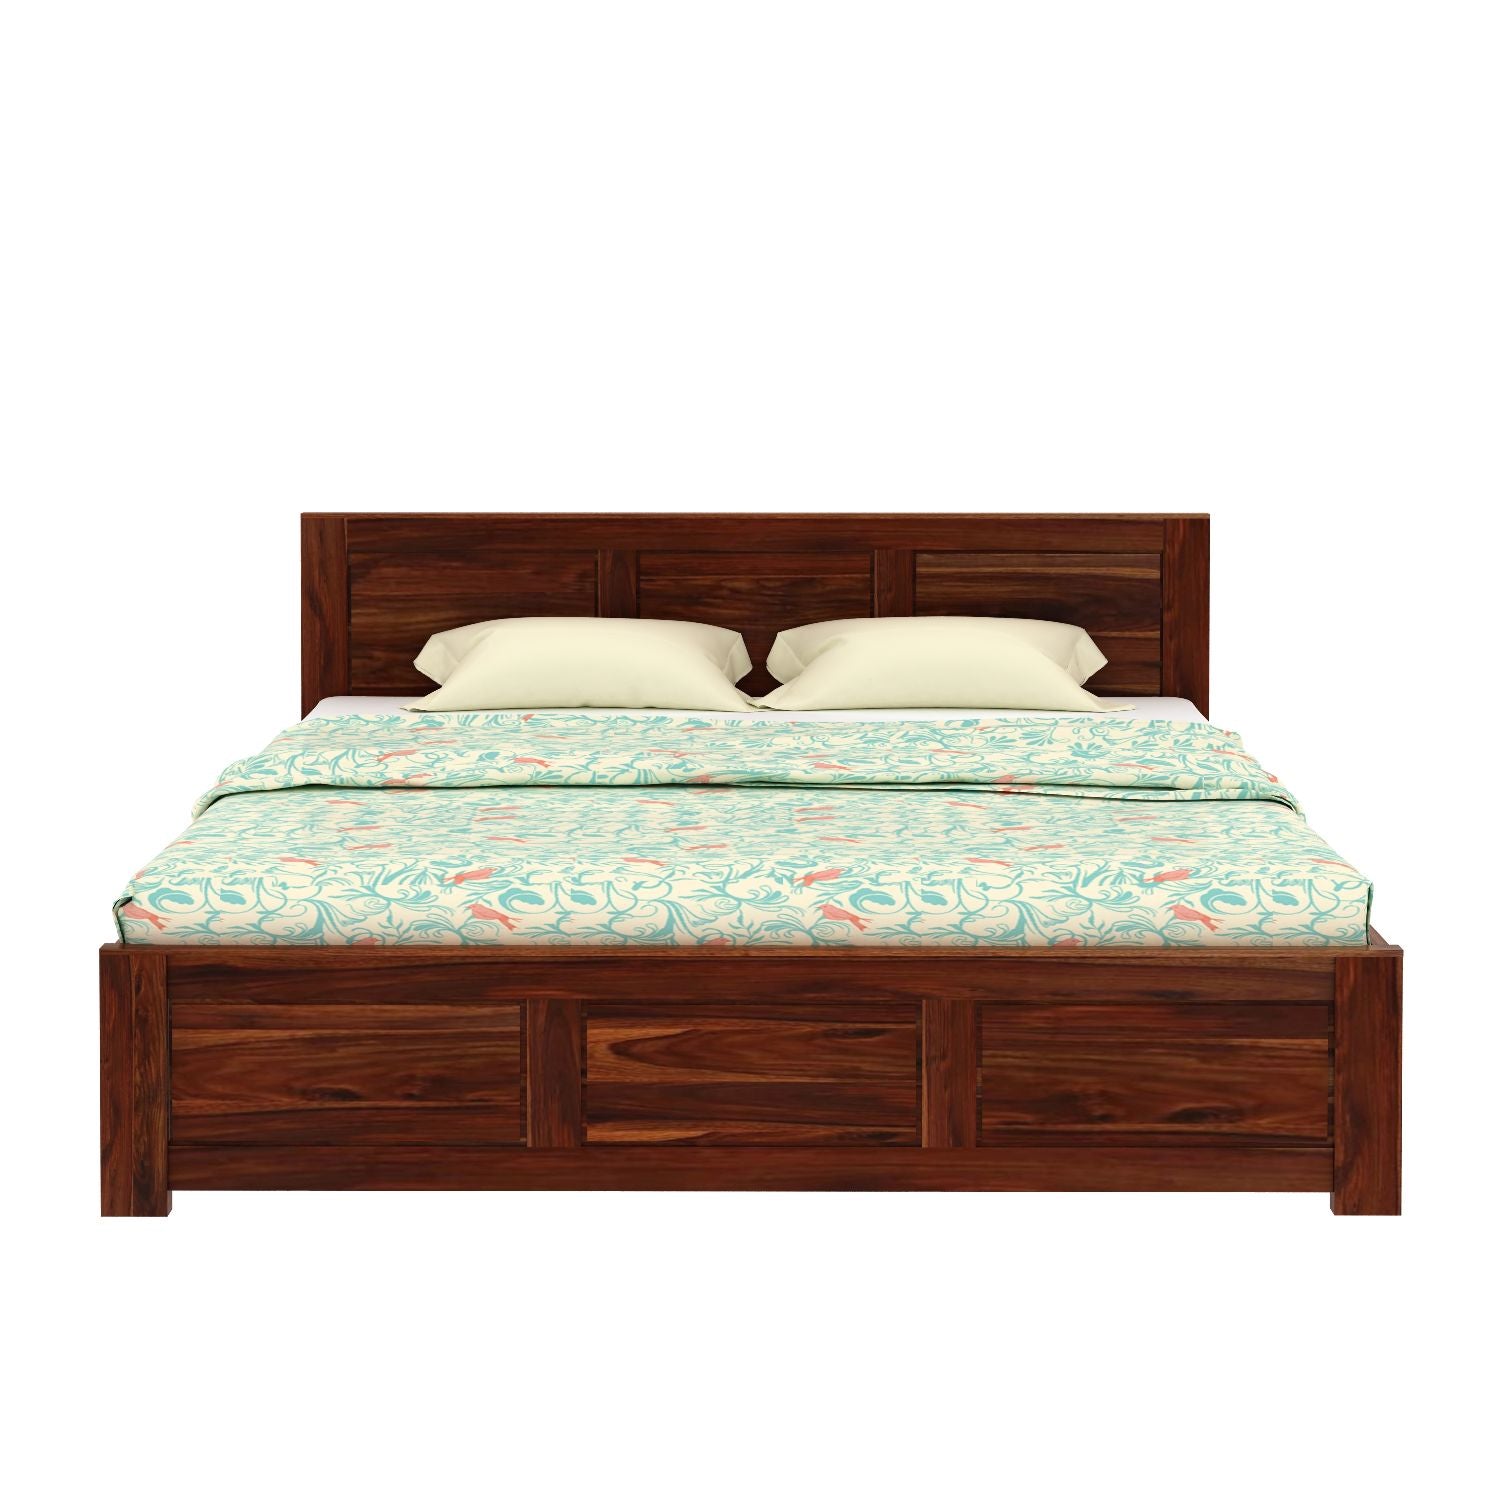 Woodwing Solid Sheesham Wood Bed Without Storage (Queen Size, Natural Finish)